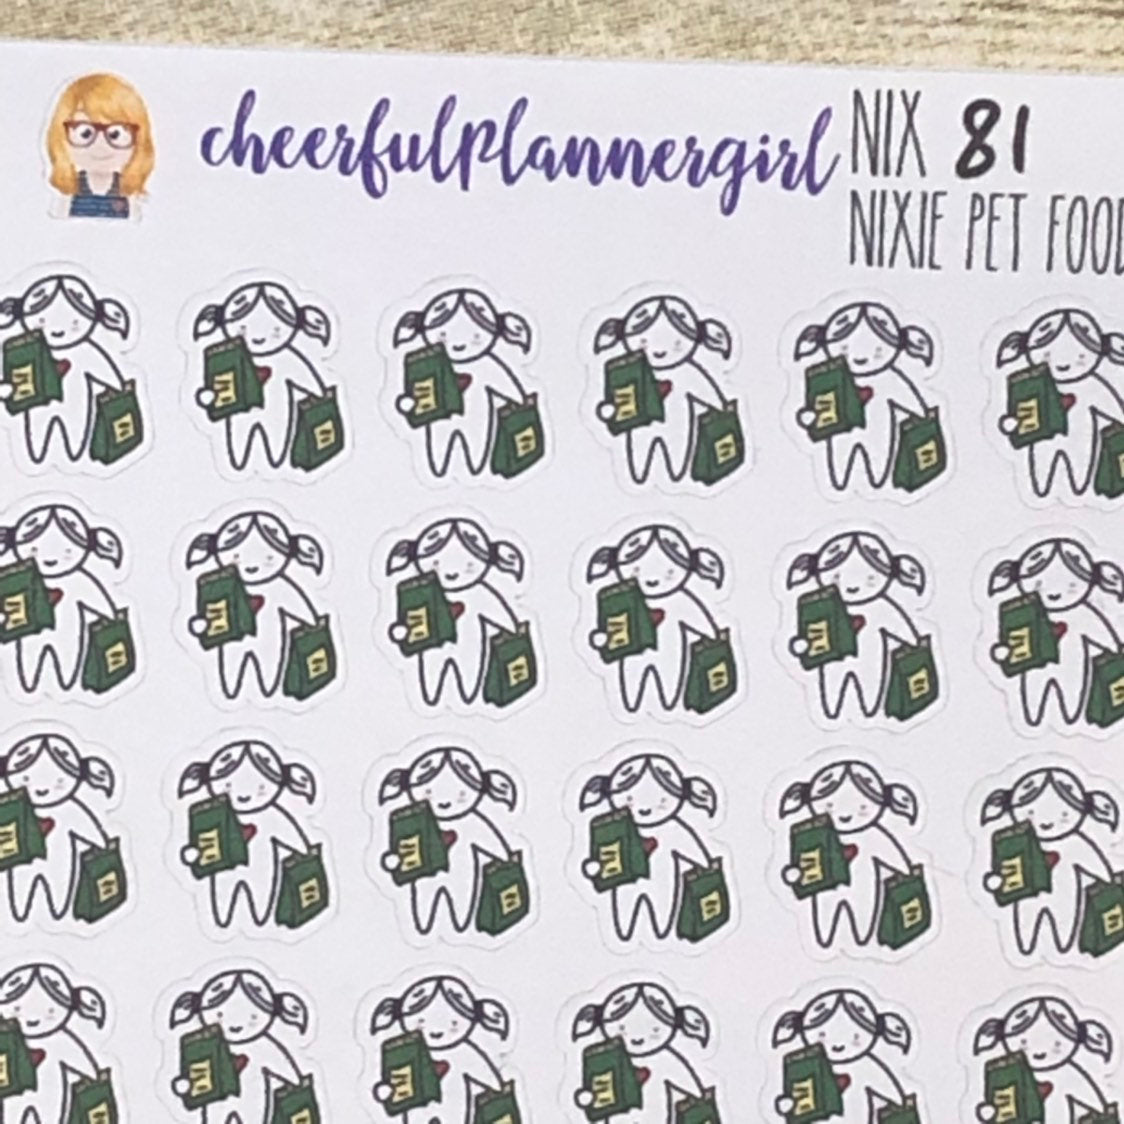 Nixie buys Pet Food Planner Stickers